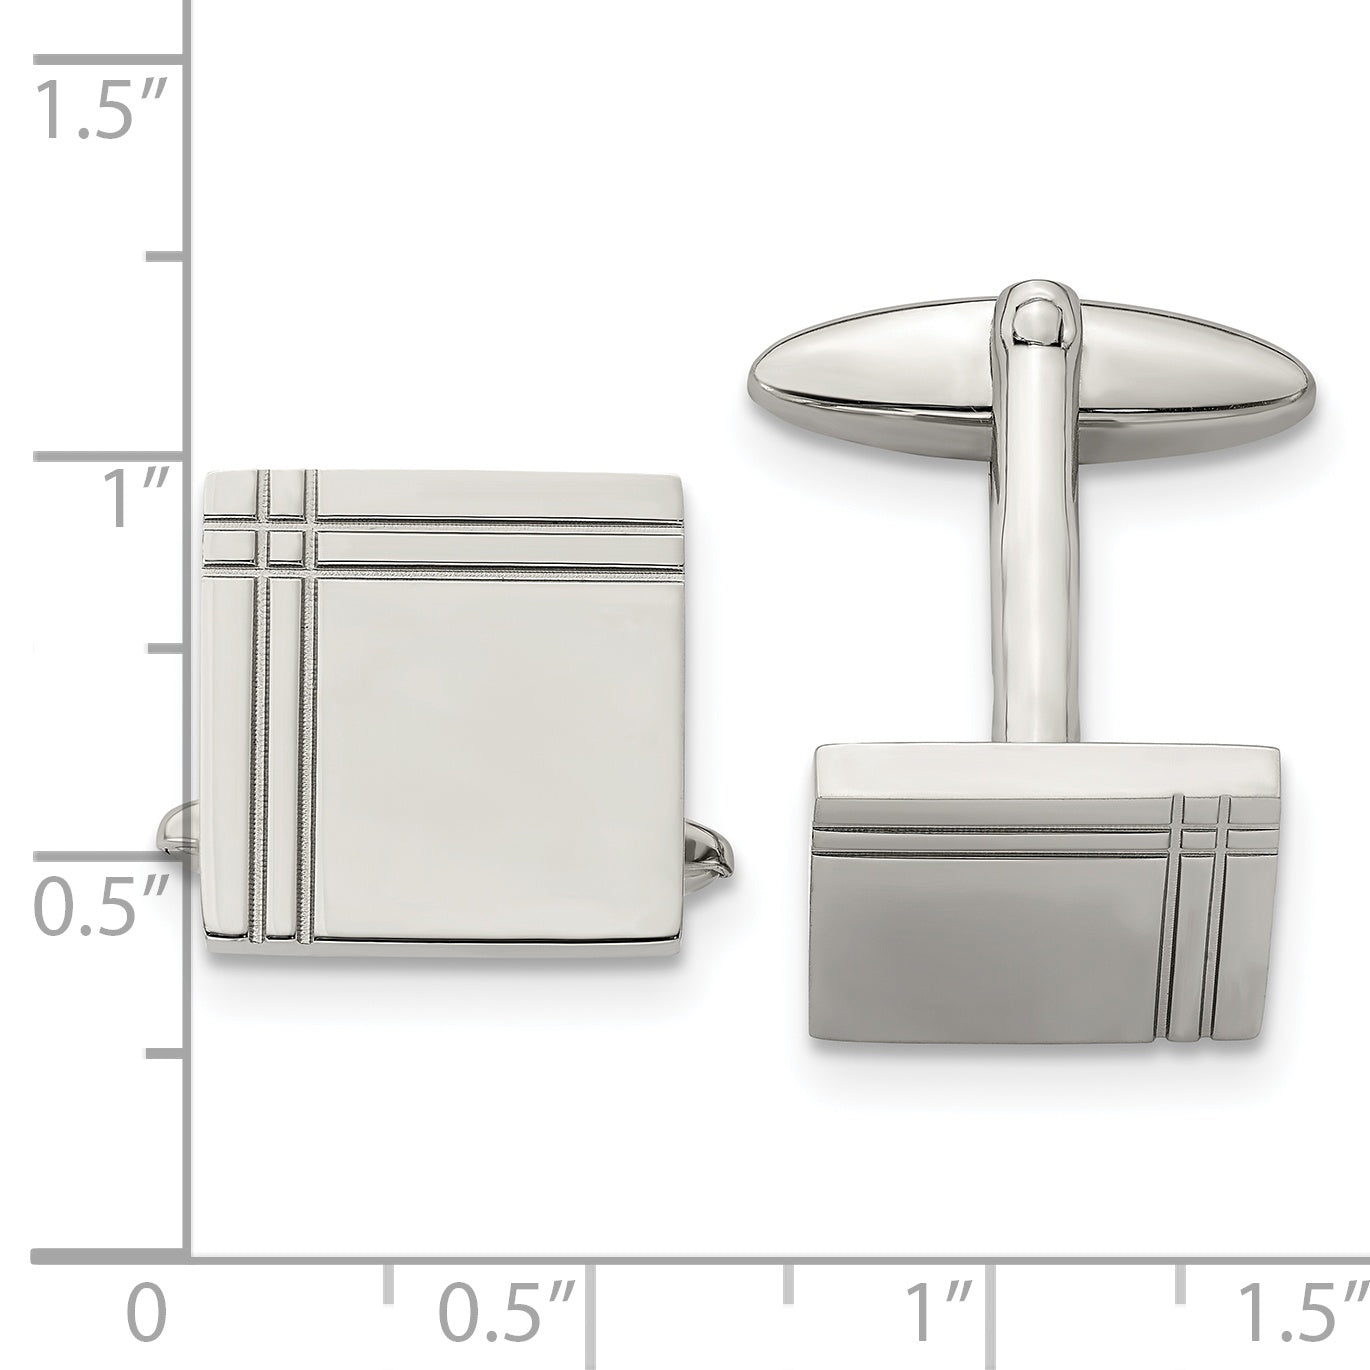 Chisel Stainless Steel Polished Square Cufflinks